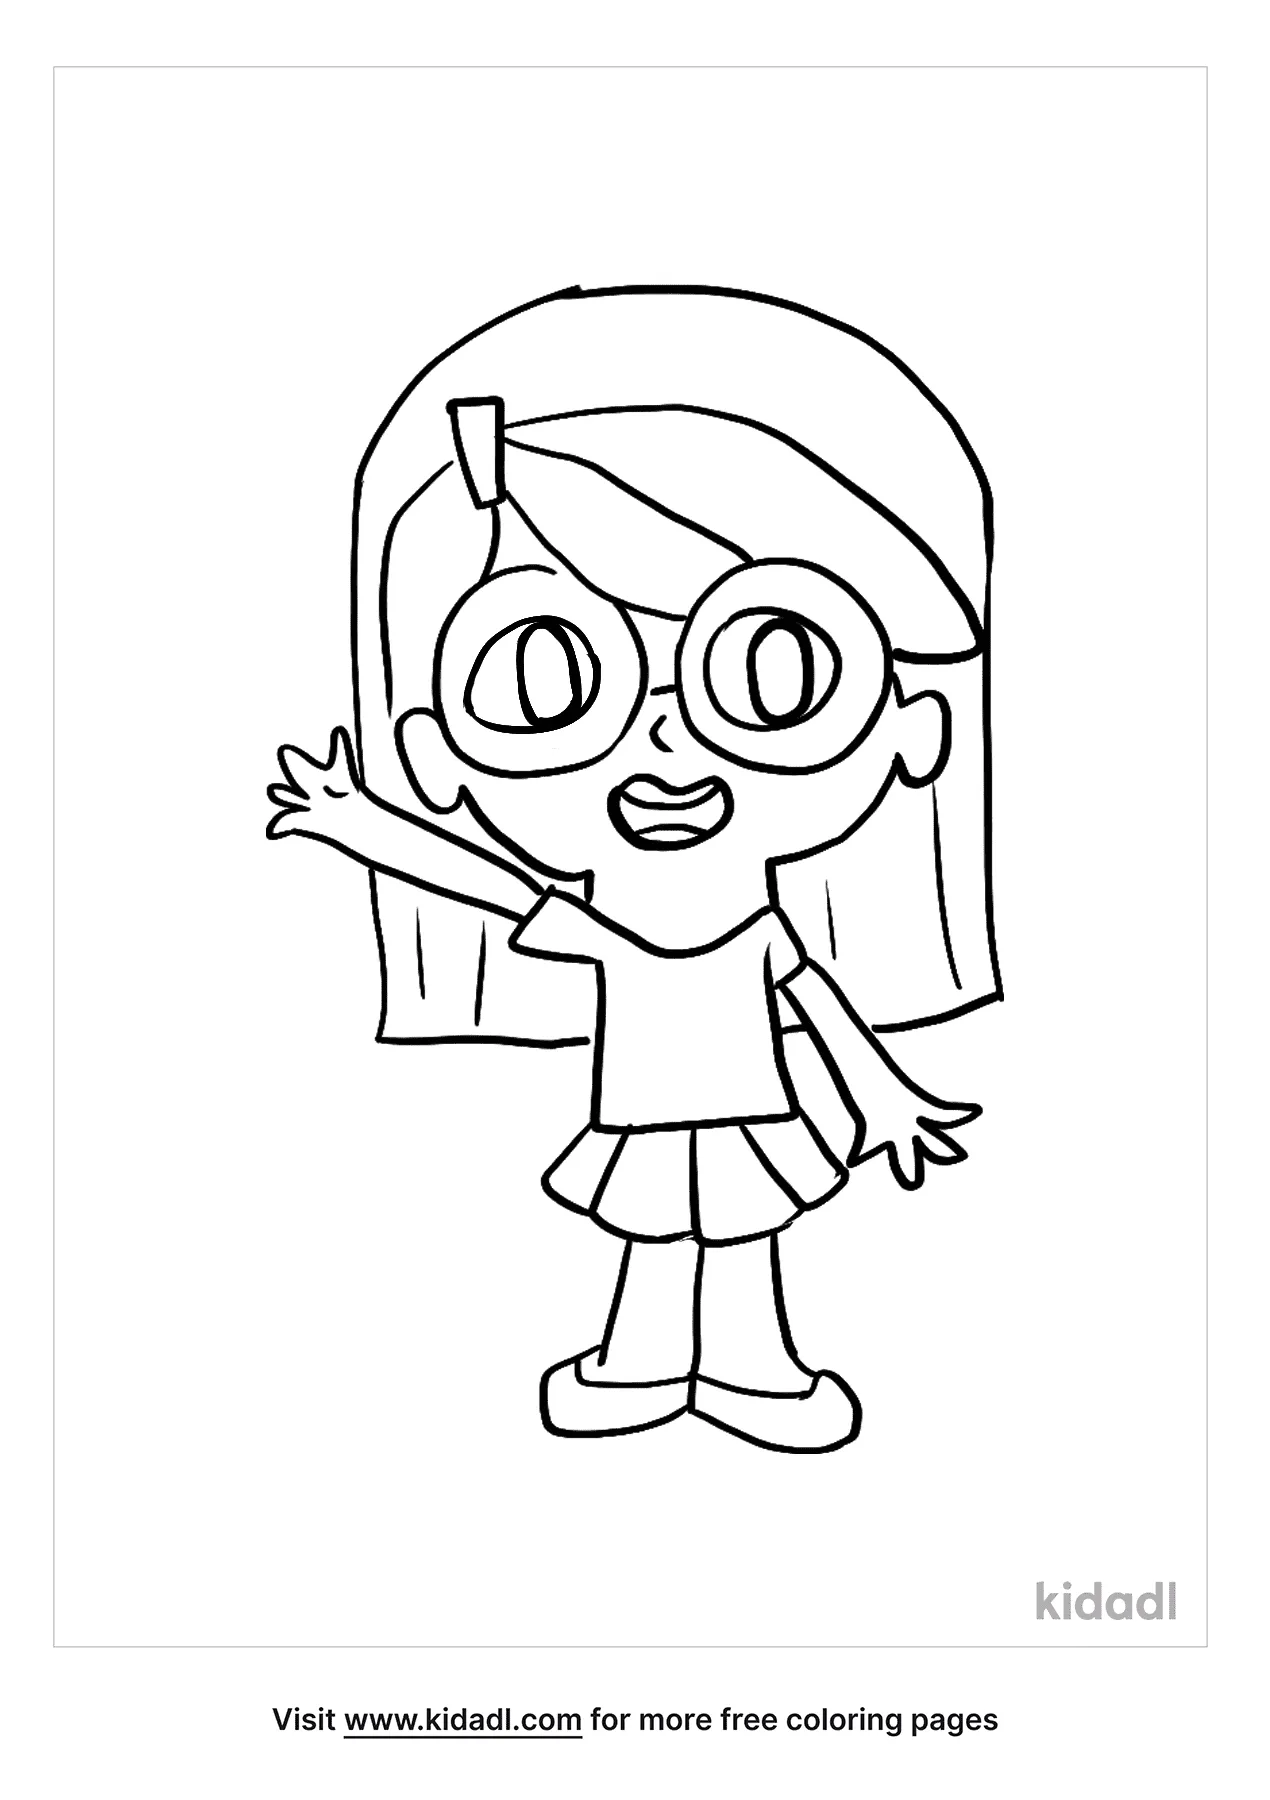 Free Hello Kids Coloring Page | Coloring Page Printables | Kidadl